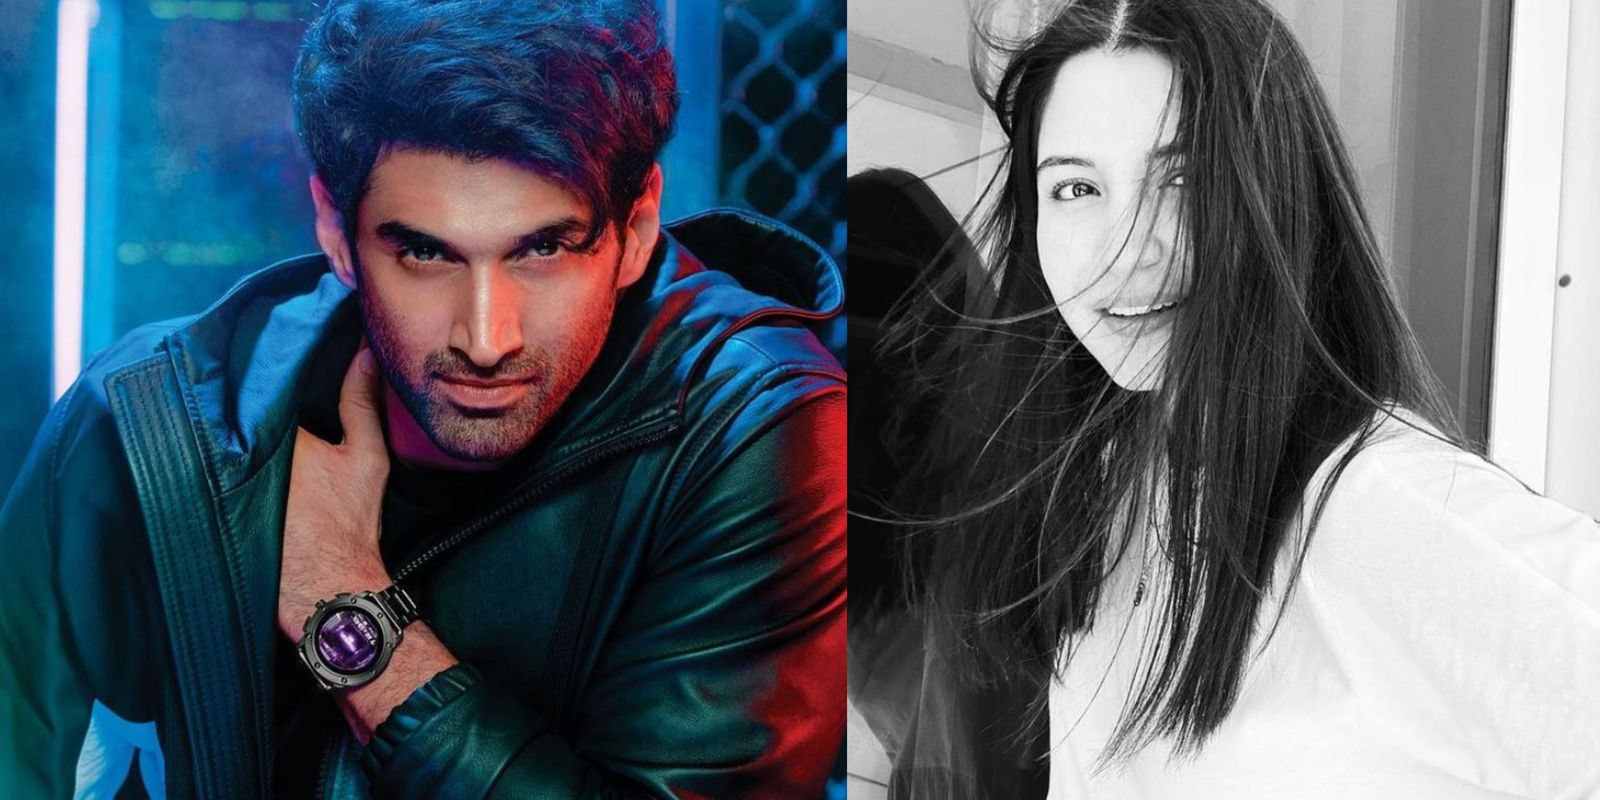 Aditya Roy Kapur Roped In For Yet Another Action Film Titled Afghan, Anushka Sharma To Produce It?